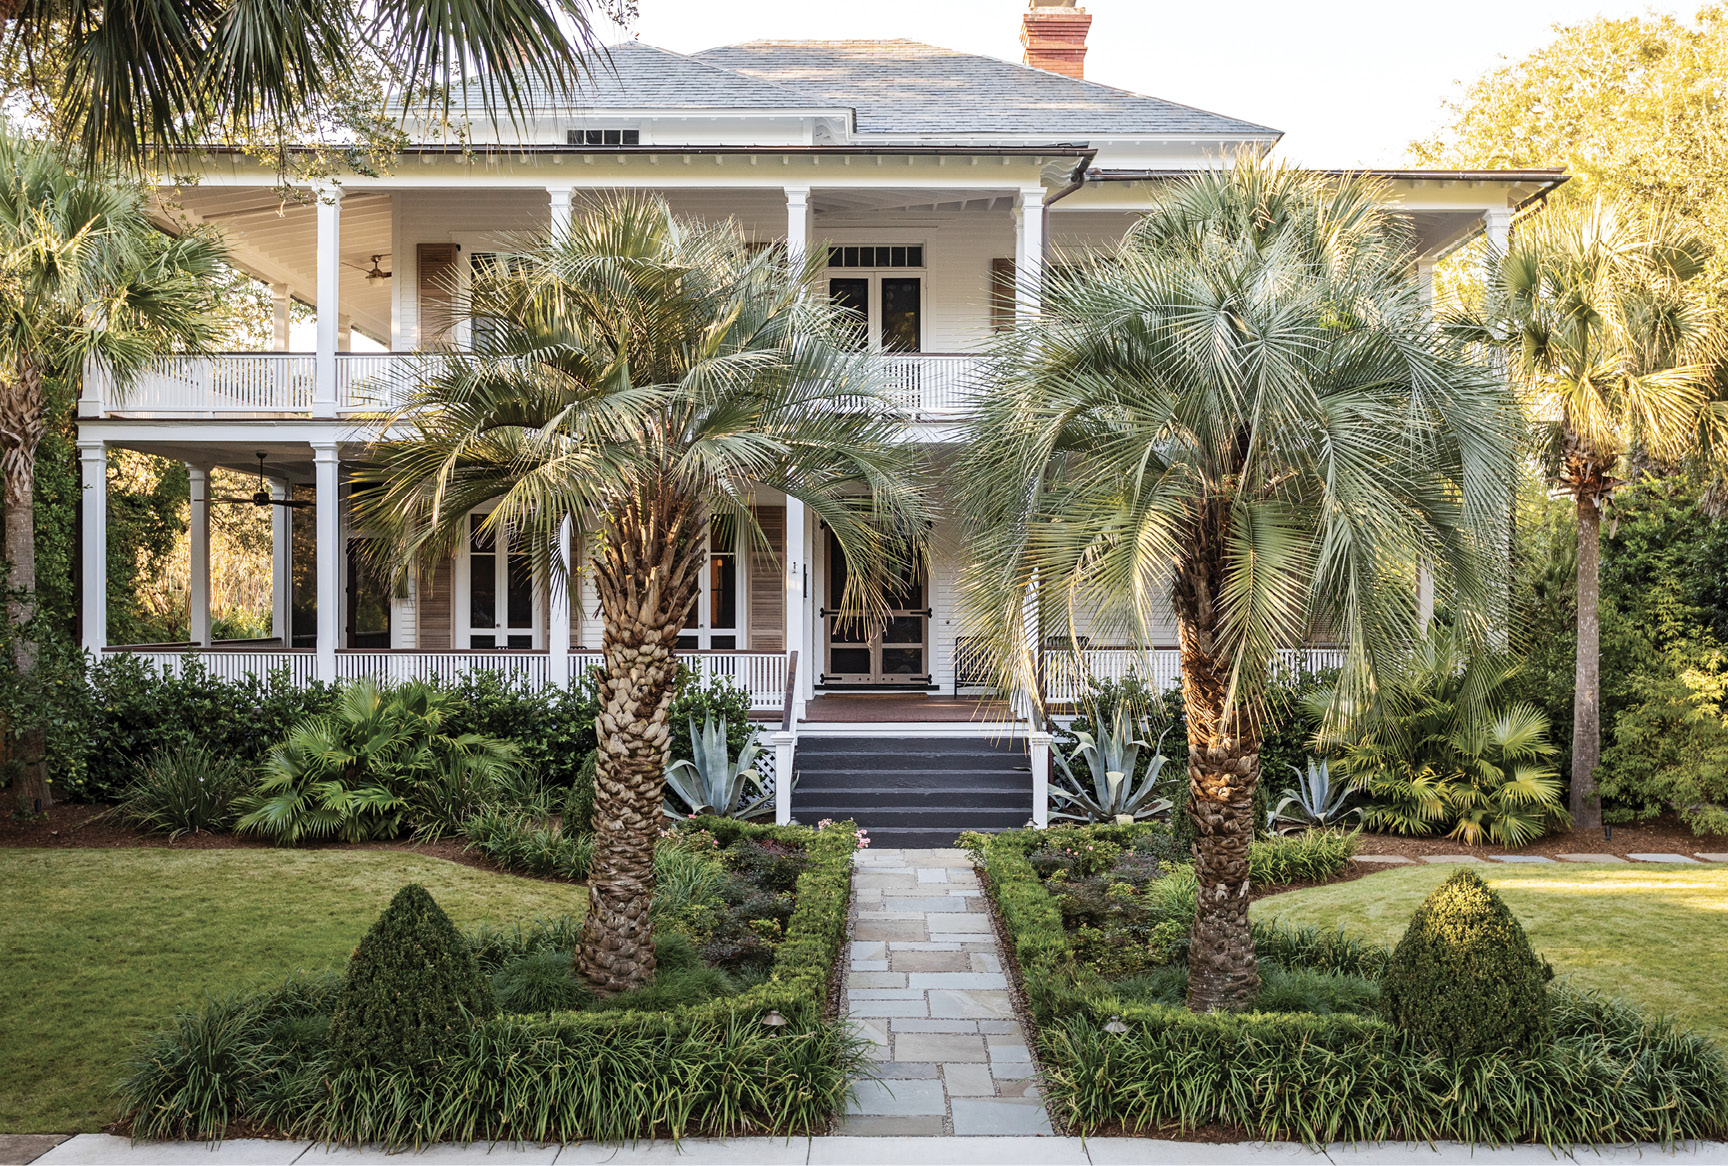 Officers Row: This five-bedroom, four-and-a-half-bath home was built in 1894 to house senior officers of the US military and their families prior to the Spanish American War. Today, the historical home on Sullivan’s Island’s I’On Avenue has been thoughtfully renovated to fit the needs of a modern family from Manhattan.